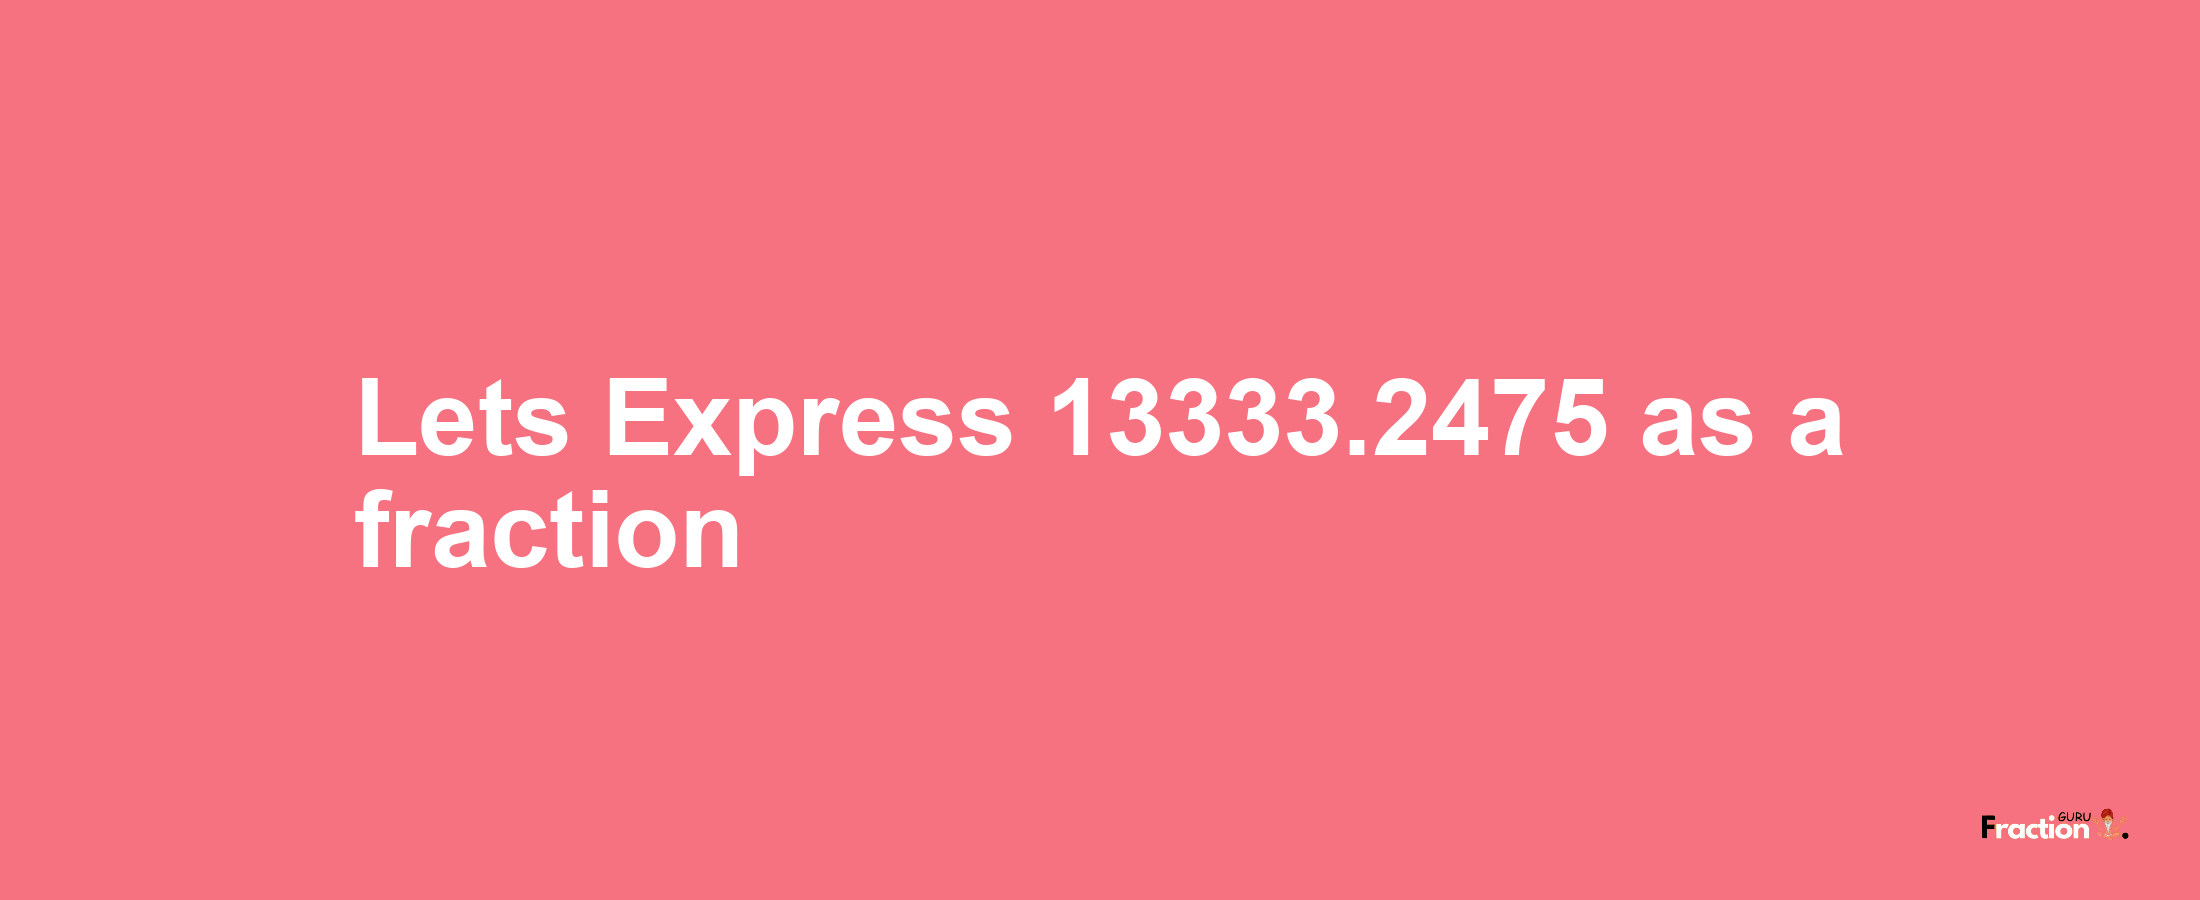 Lets Express 13333.2475 as afraction